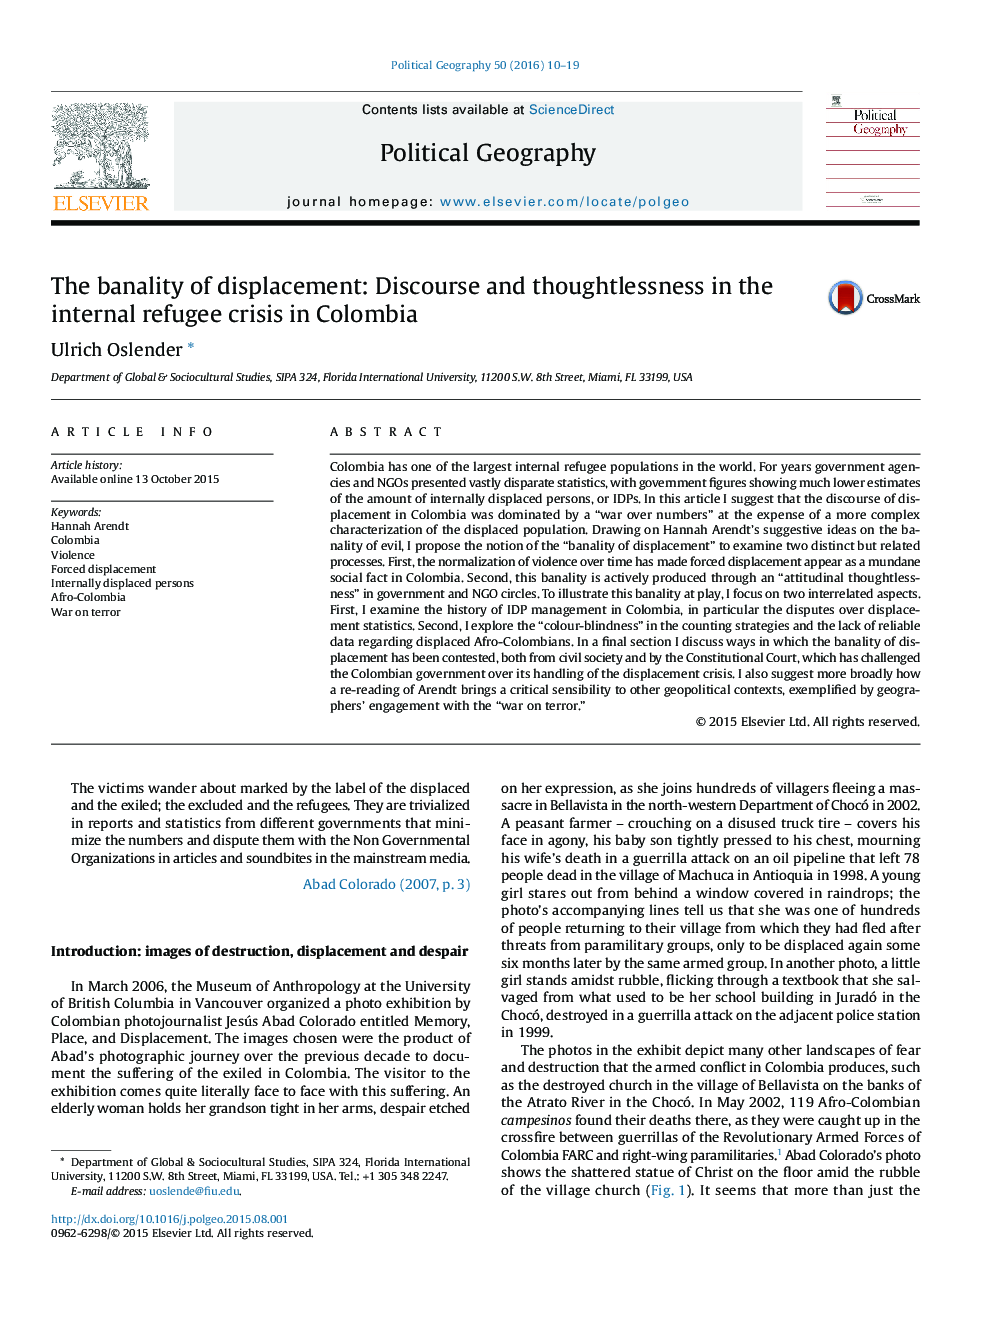 The banality of displacement: Discourse and thoughtlessness in the internal refugee crisis in Colombia